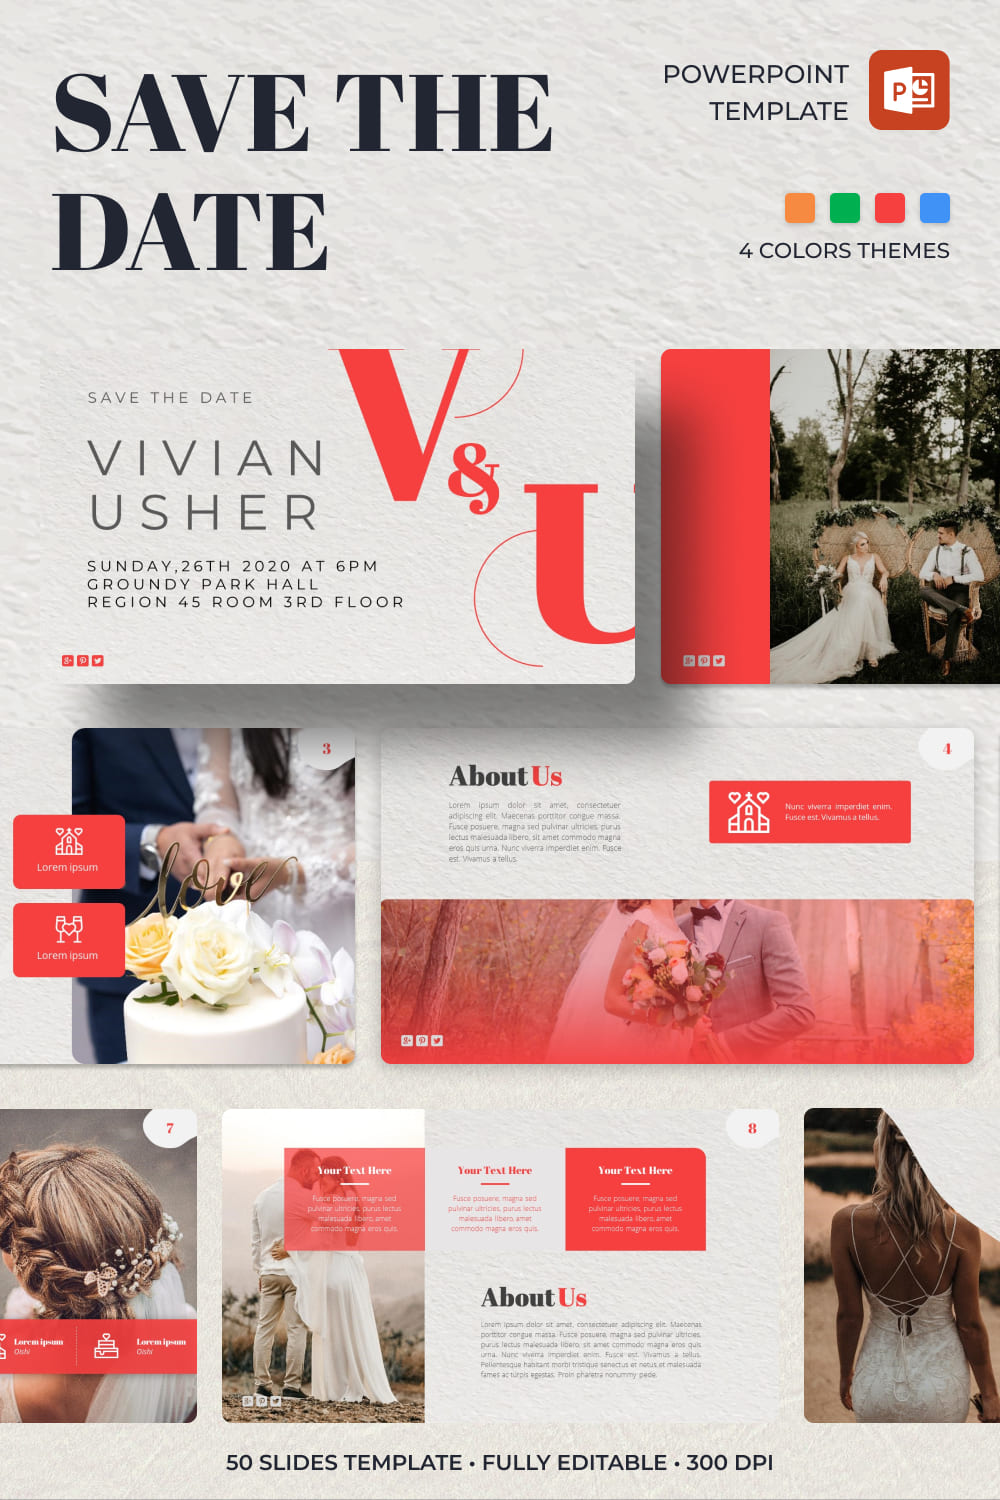 2 savethedate powerpoint template 1000h1500